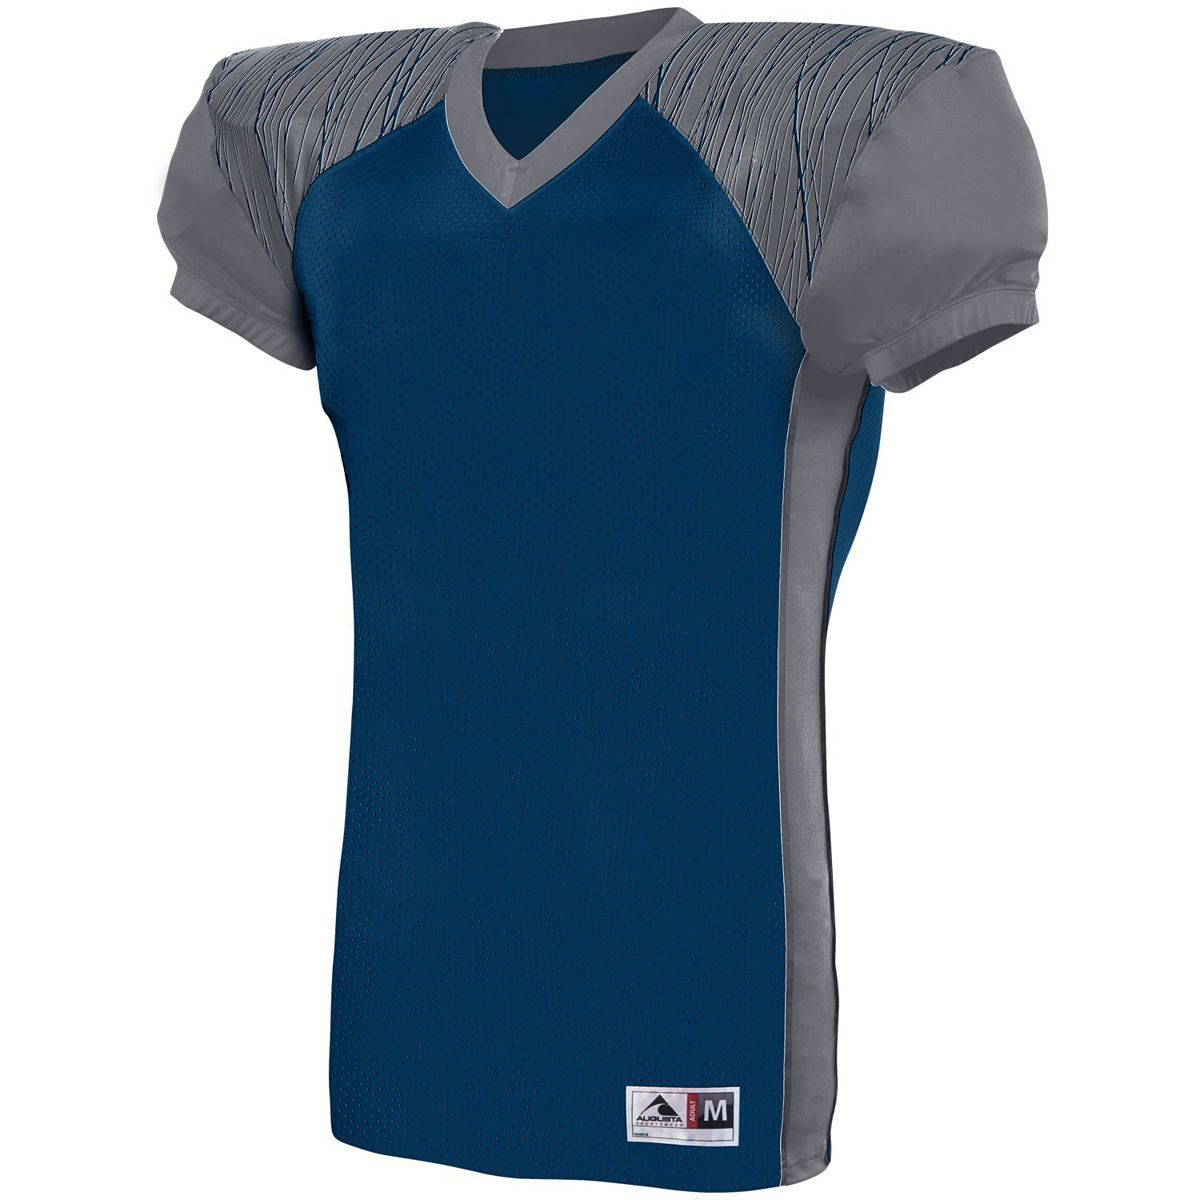 Augusta Sportswear Youth Zone Play Jersey in Navy/Graphite/Navy Print  -Part of the Youth, Youth-Jersey, Augusta-Products, Football, Shirts, All-Sports, All-Sports-1 product lines at KanaleyCreations.com